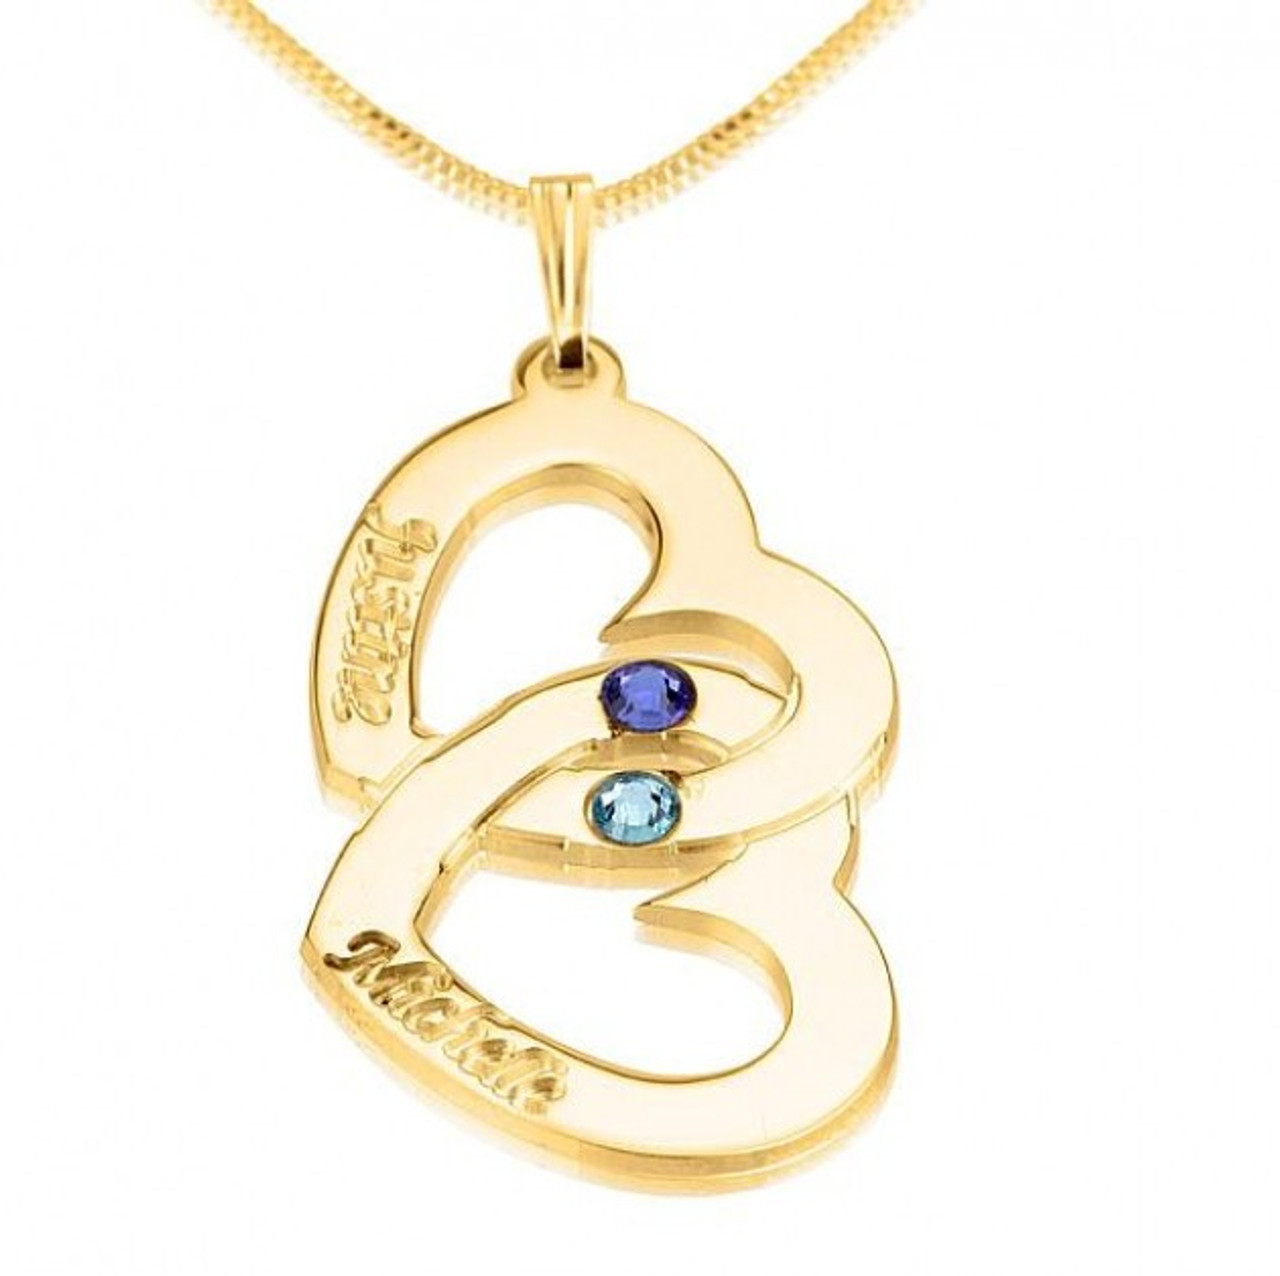 24K Gold Plated Monogram Necklace on Double Chain